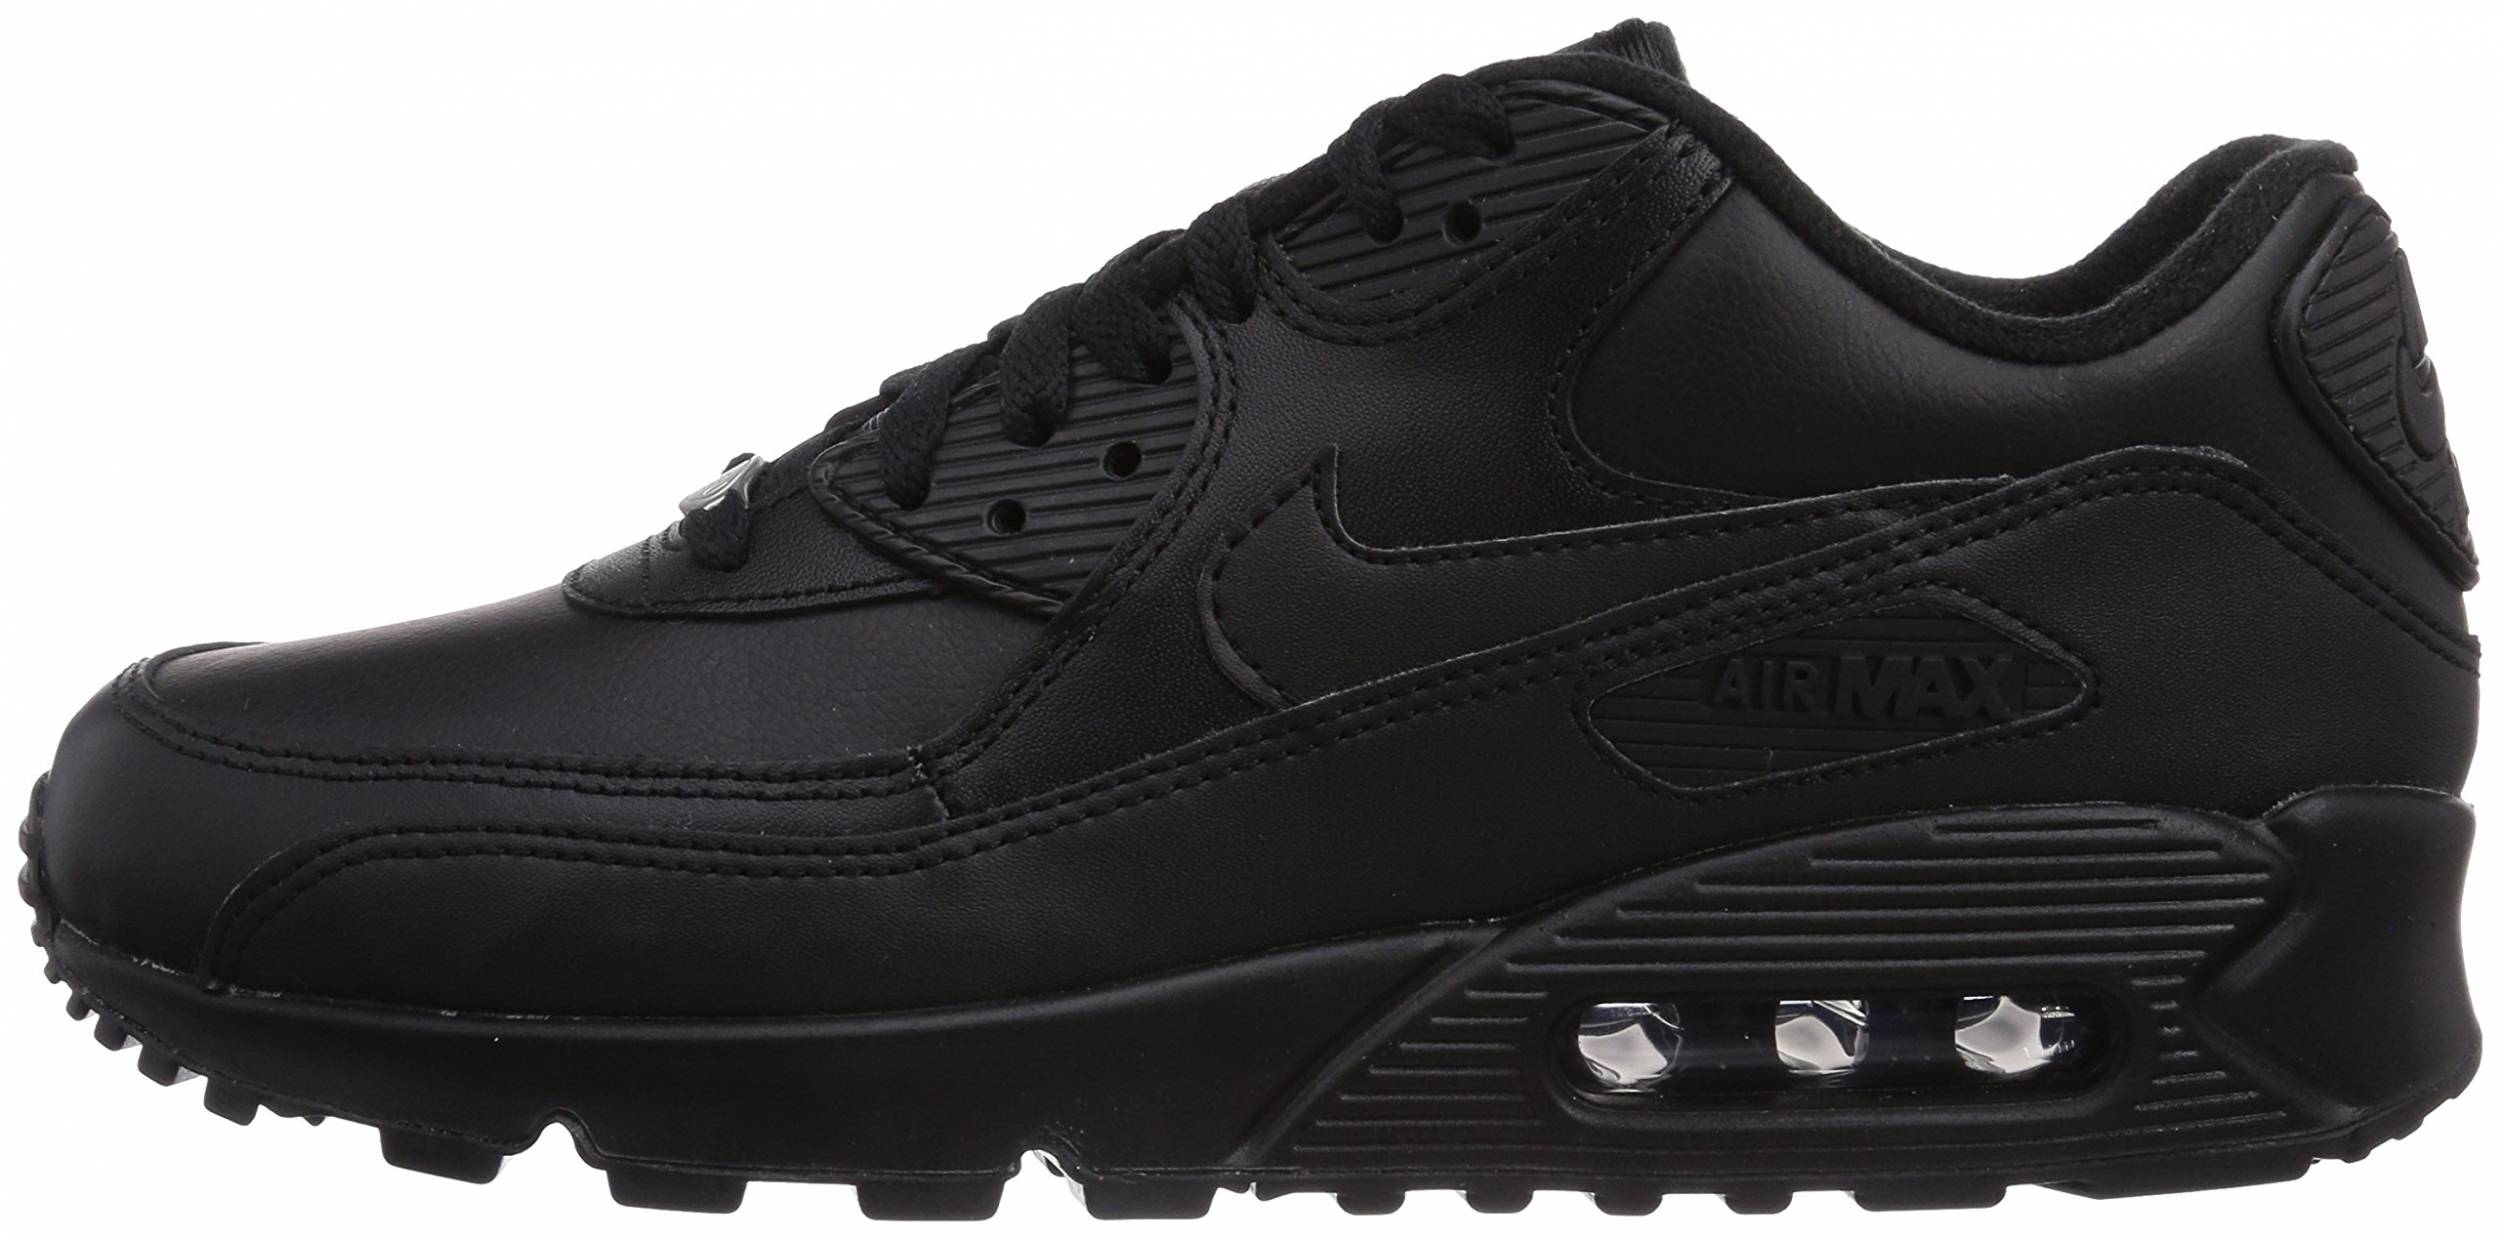 Save 40% on Nike Air Max 90 Sneakers 